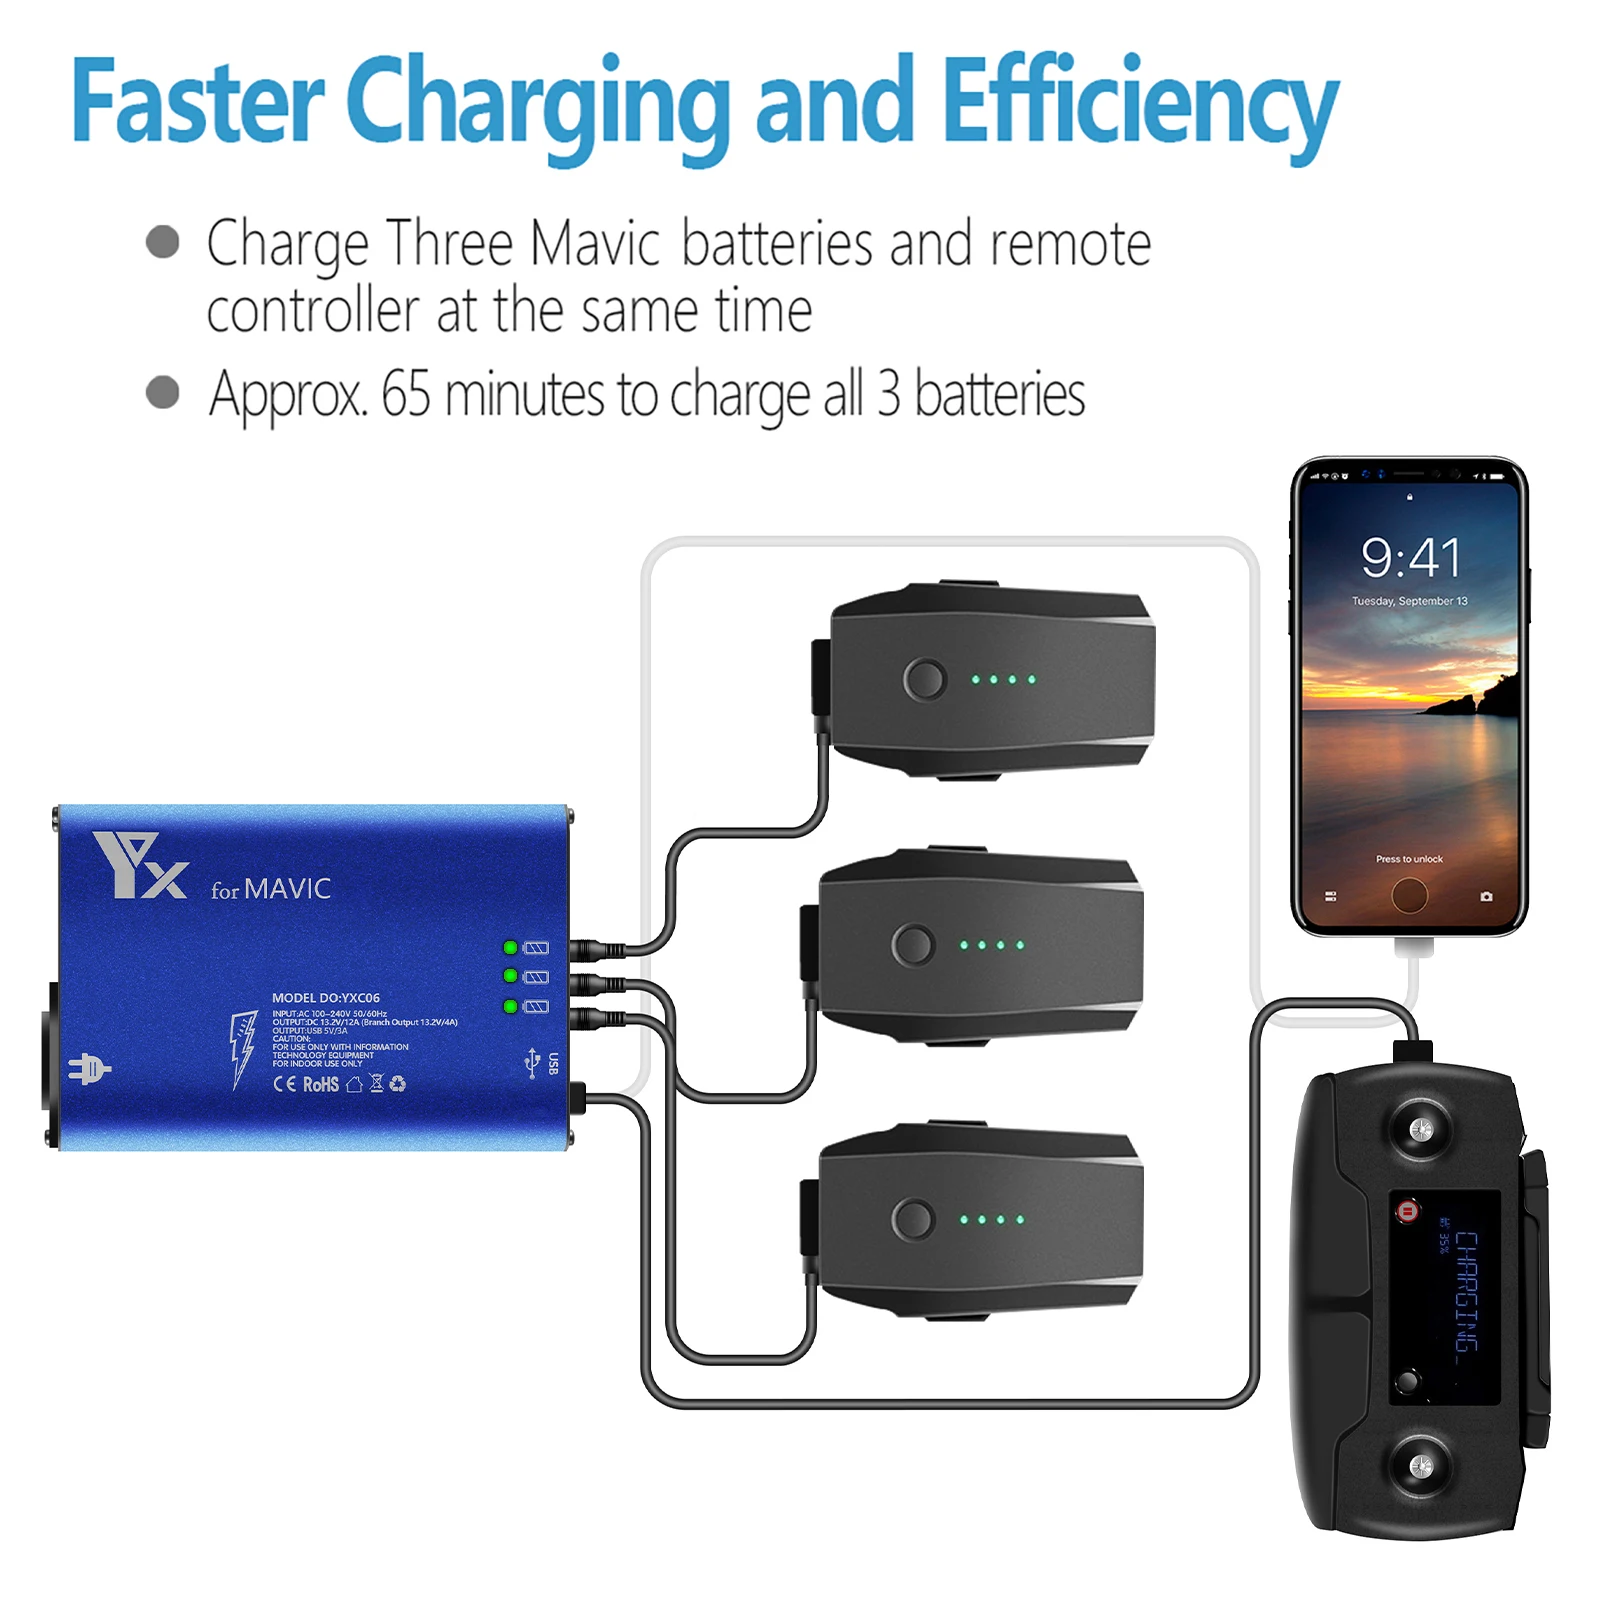 5-in-1 Multi Battery Remote Control Smart Fast Charger Charging HUB for DJI Mavi